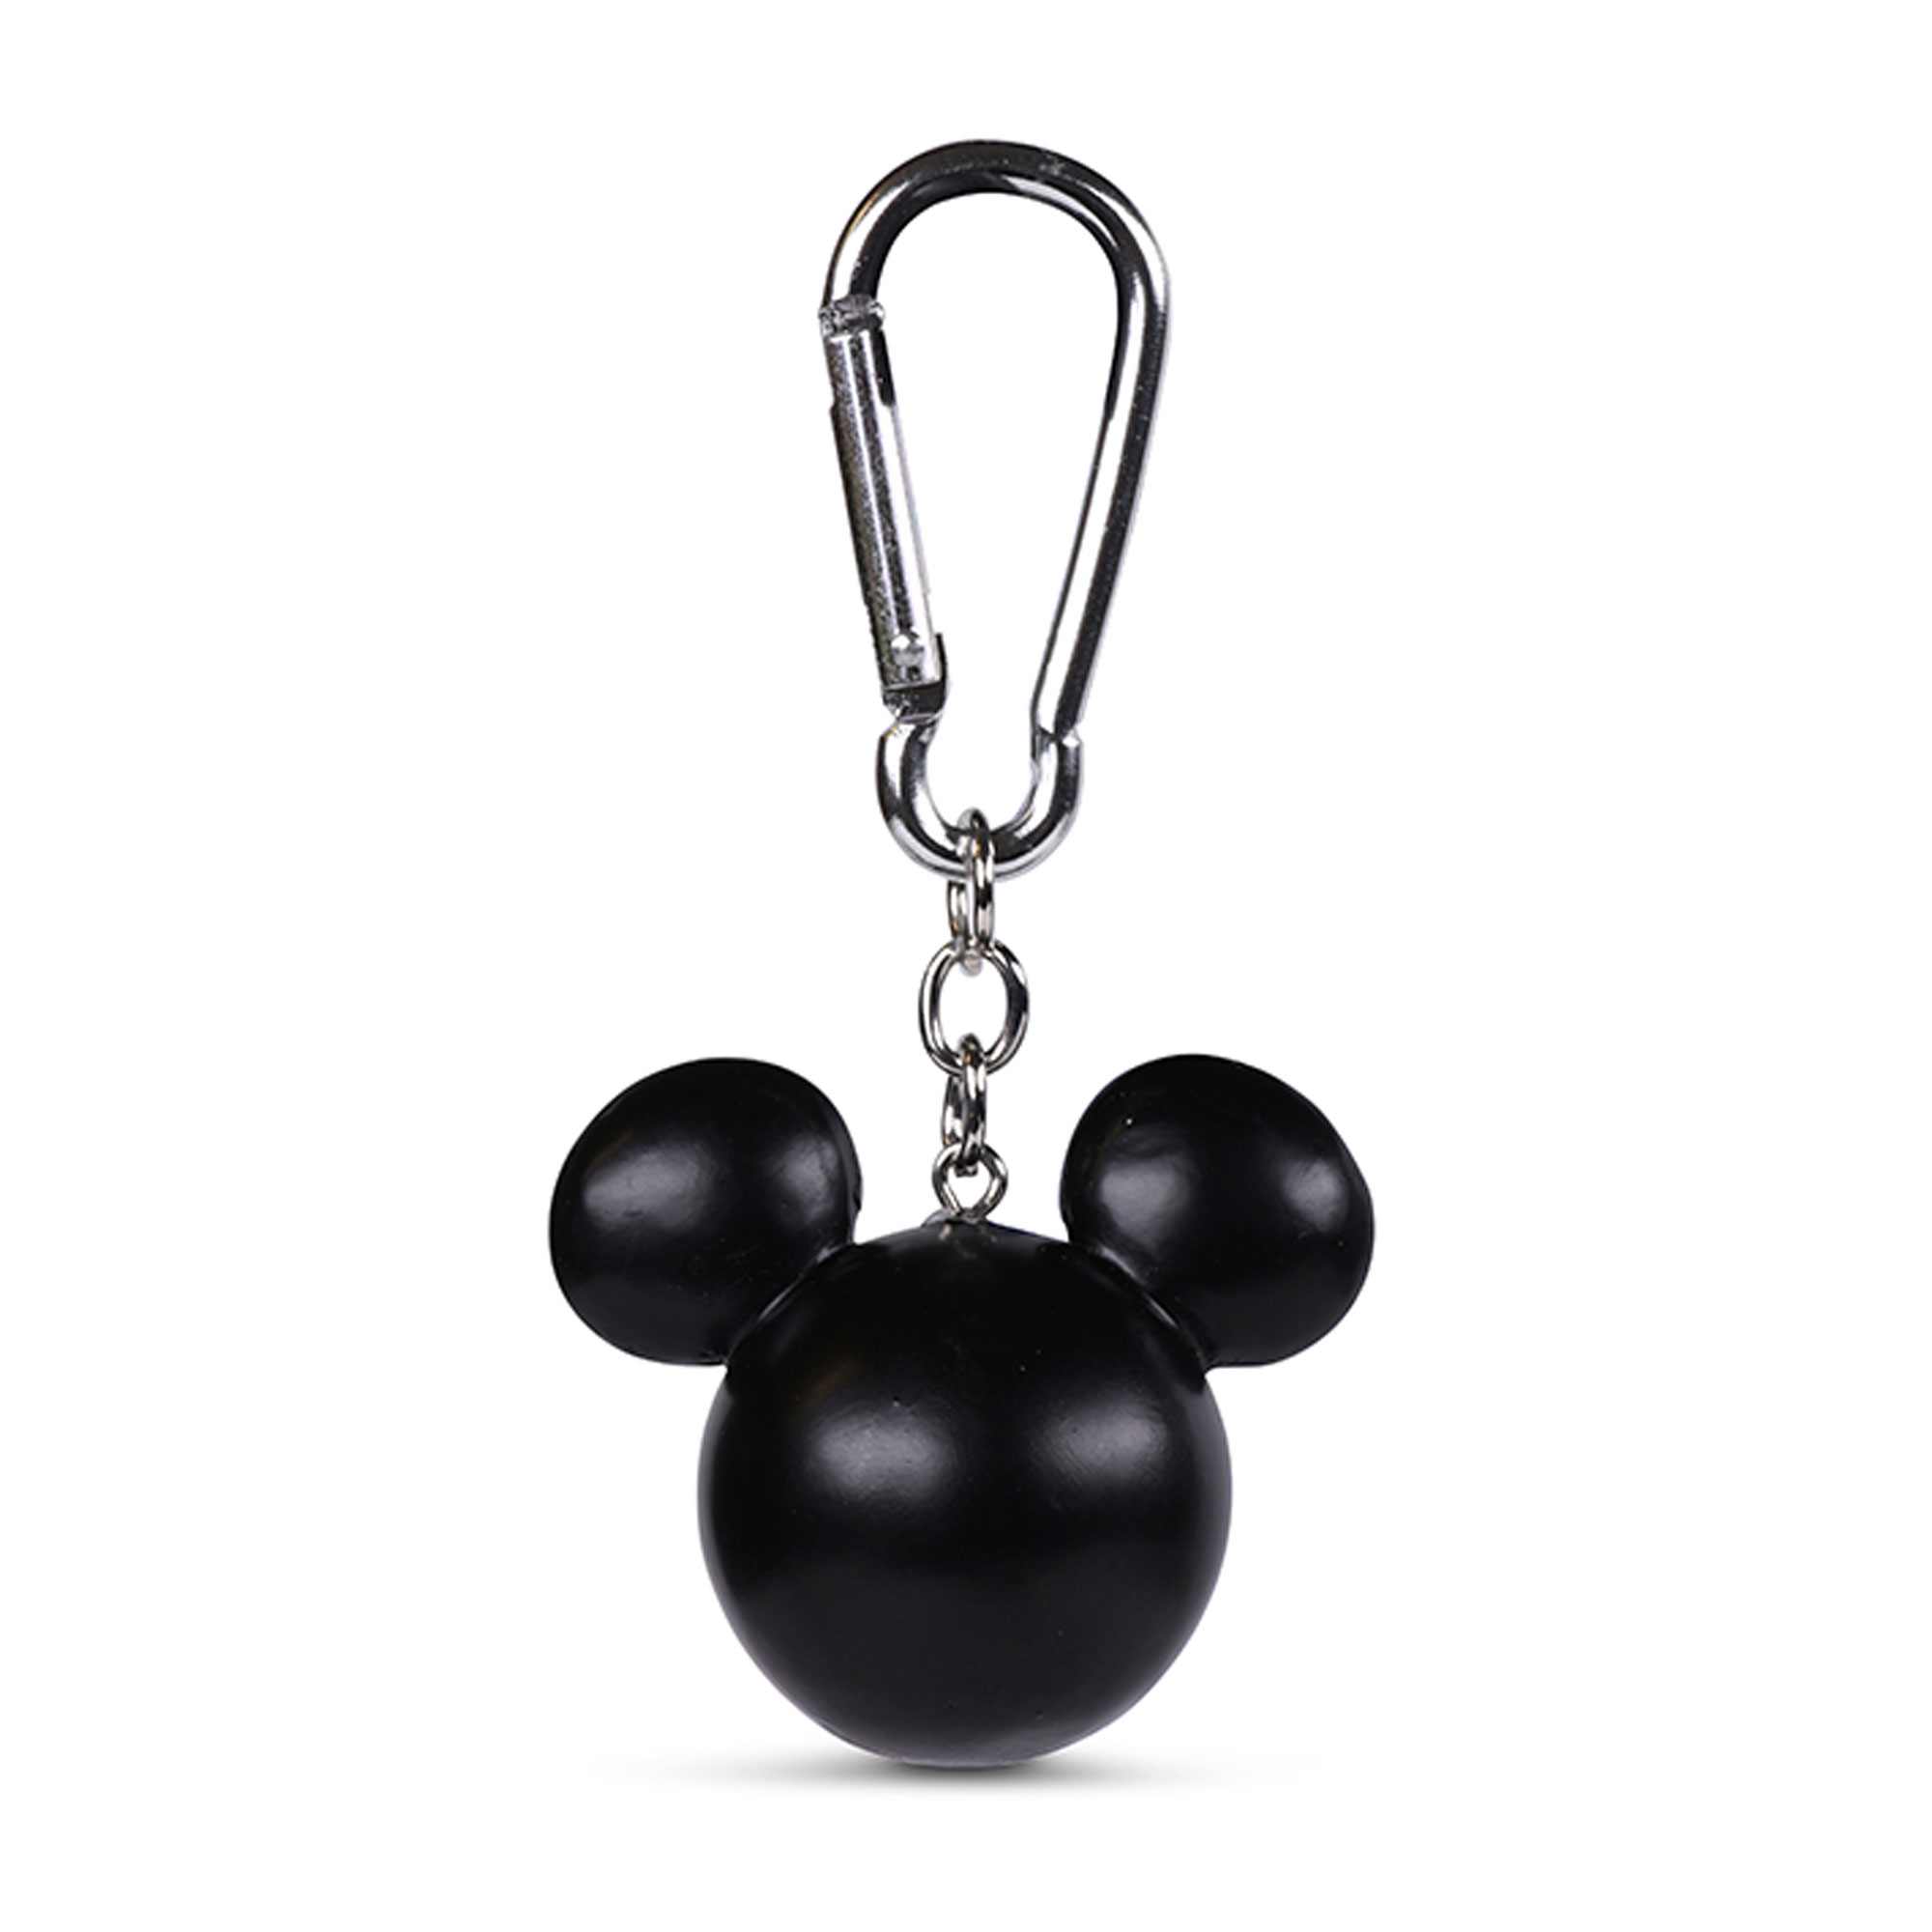 3D Keyring - Mickey Mouse Head 